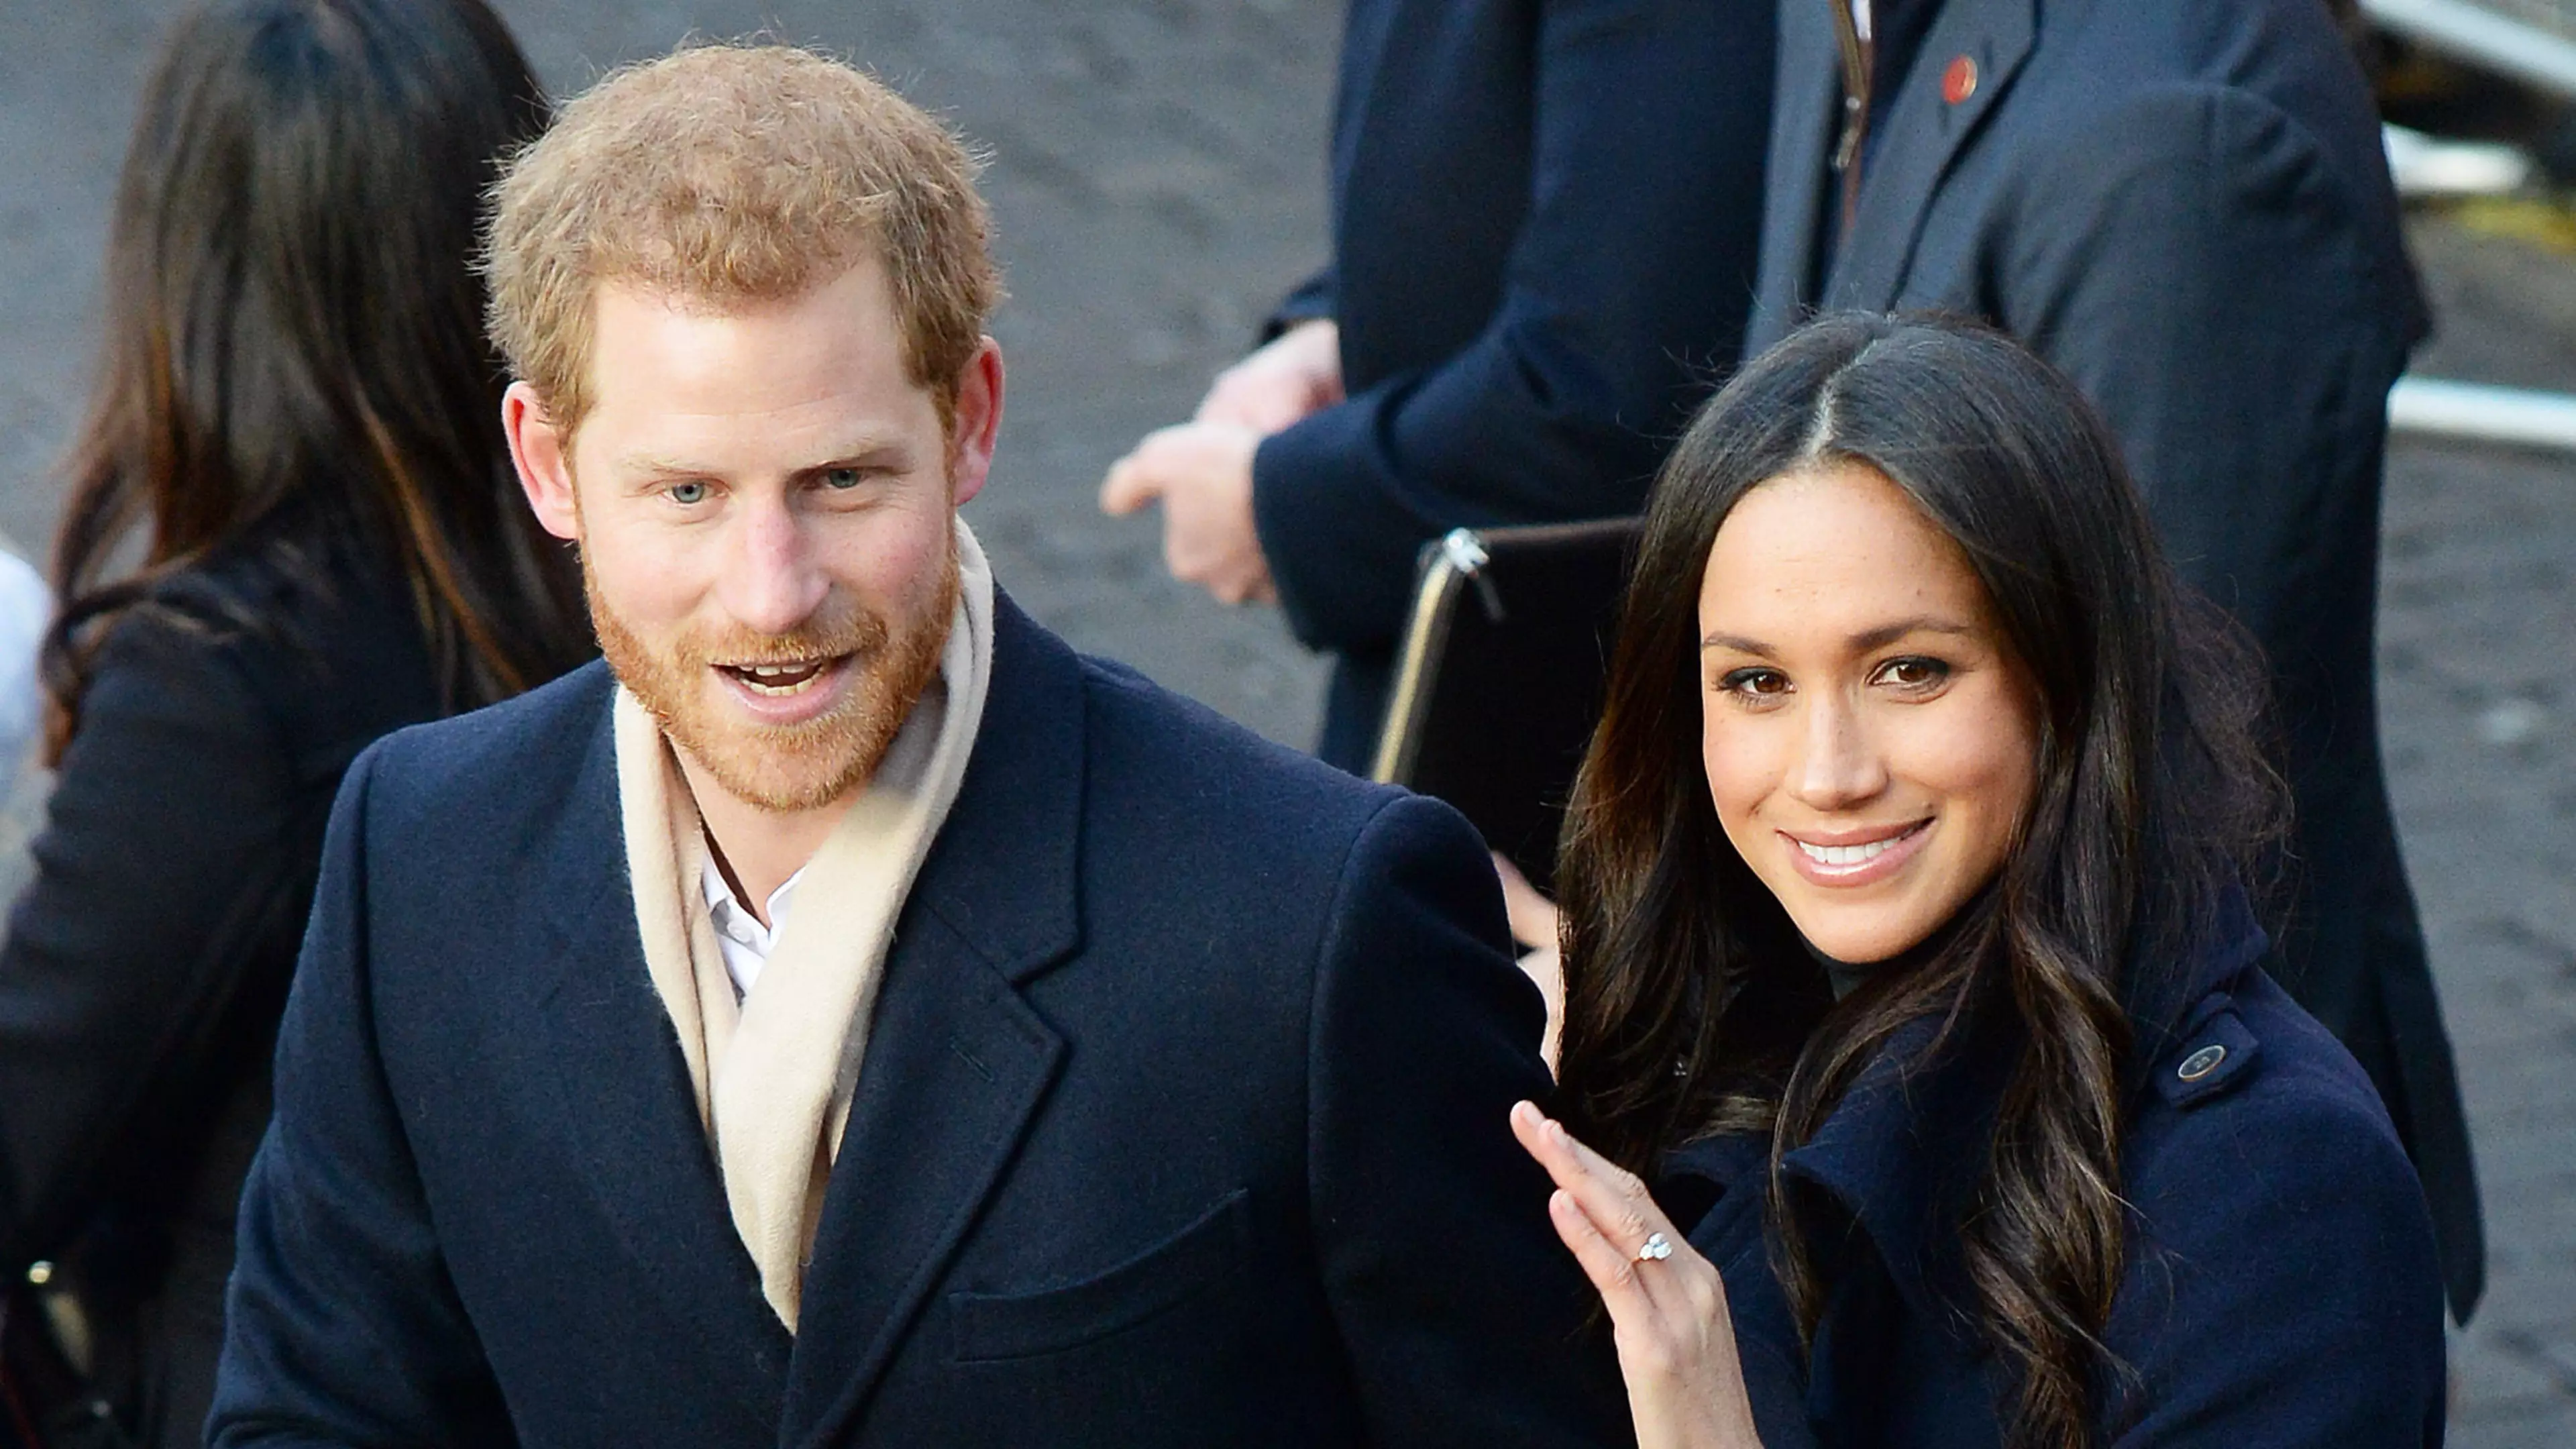 Prince Harry Shuts Down People Who Asked How A 'Ginger' Ended Up With Meghan Markle